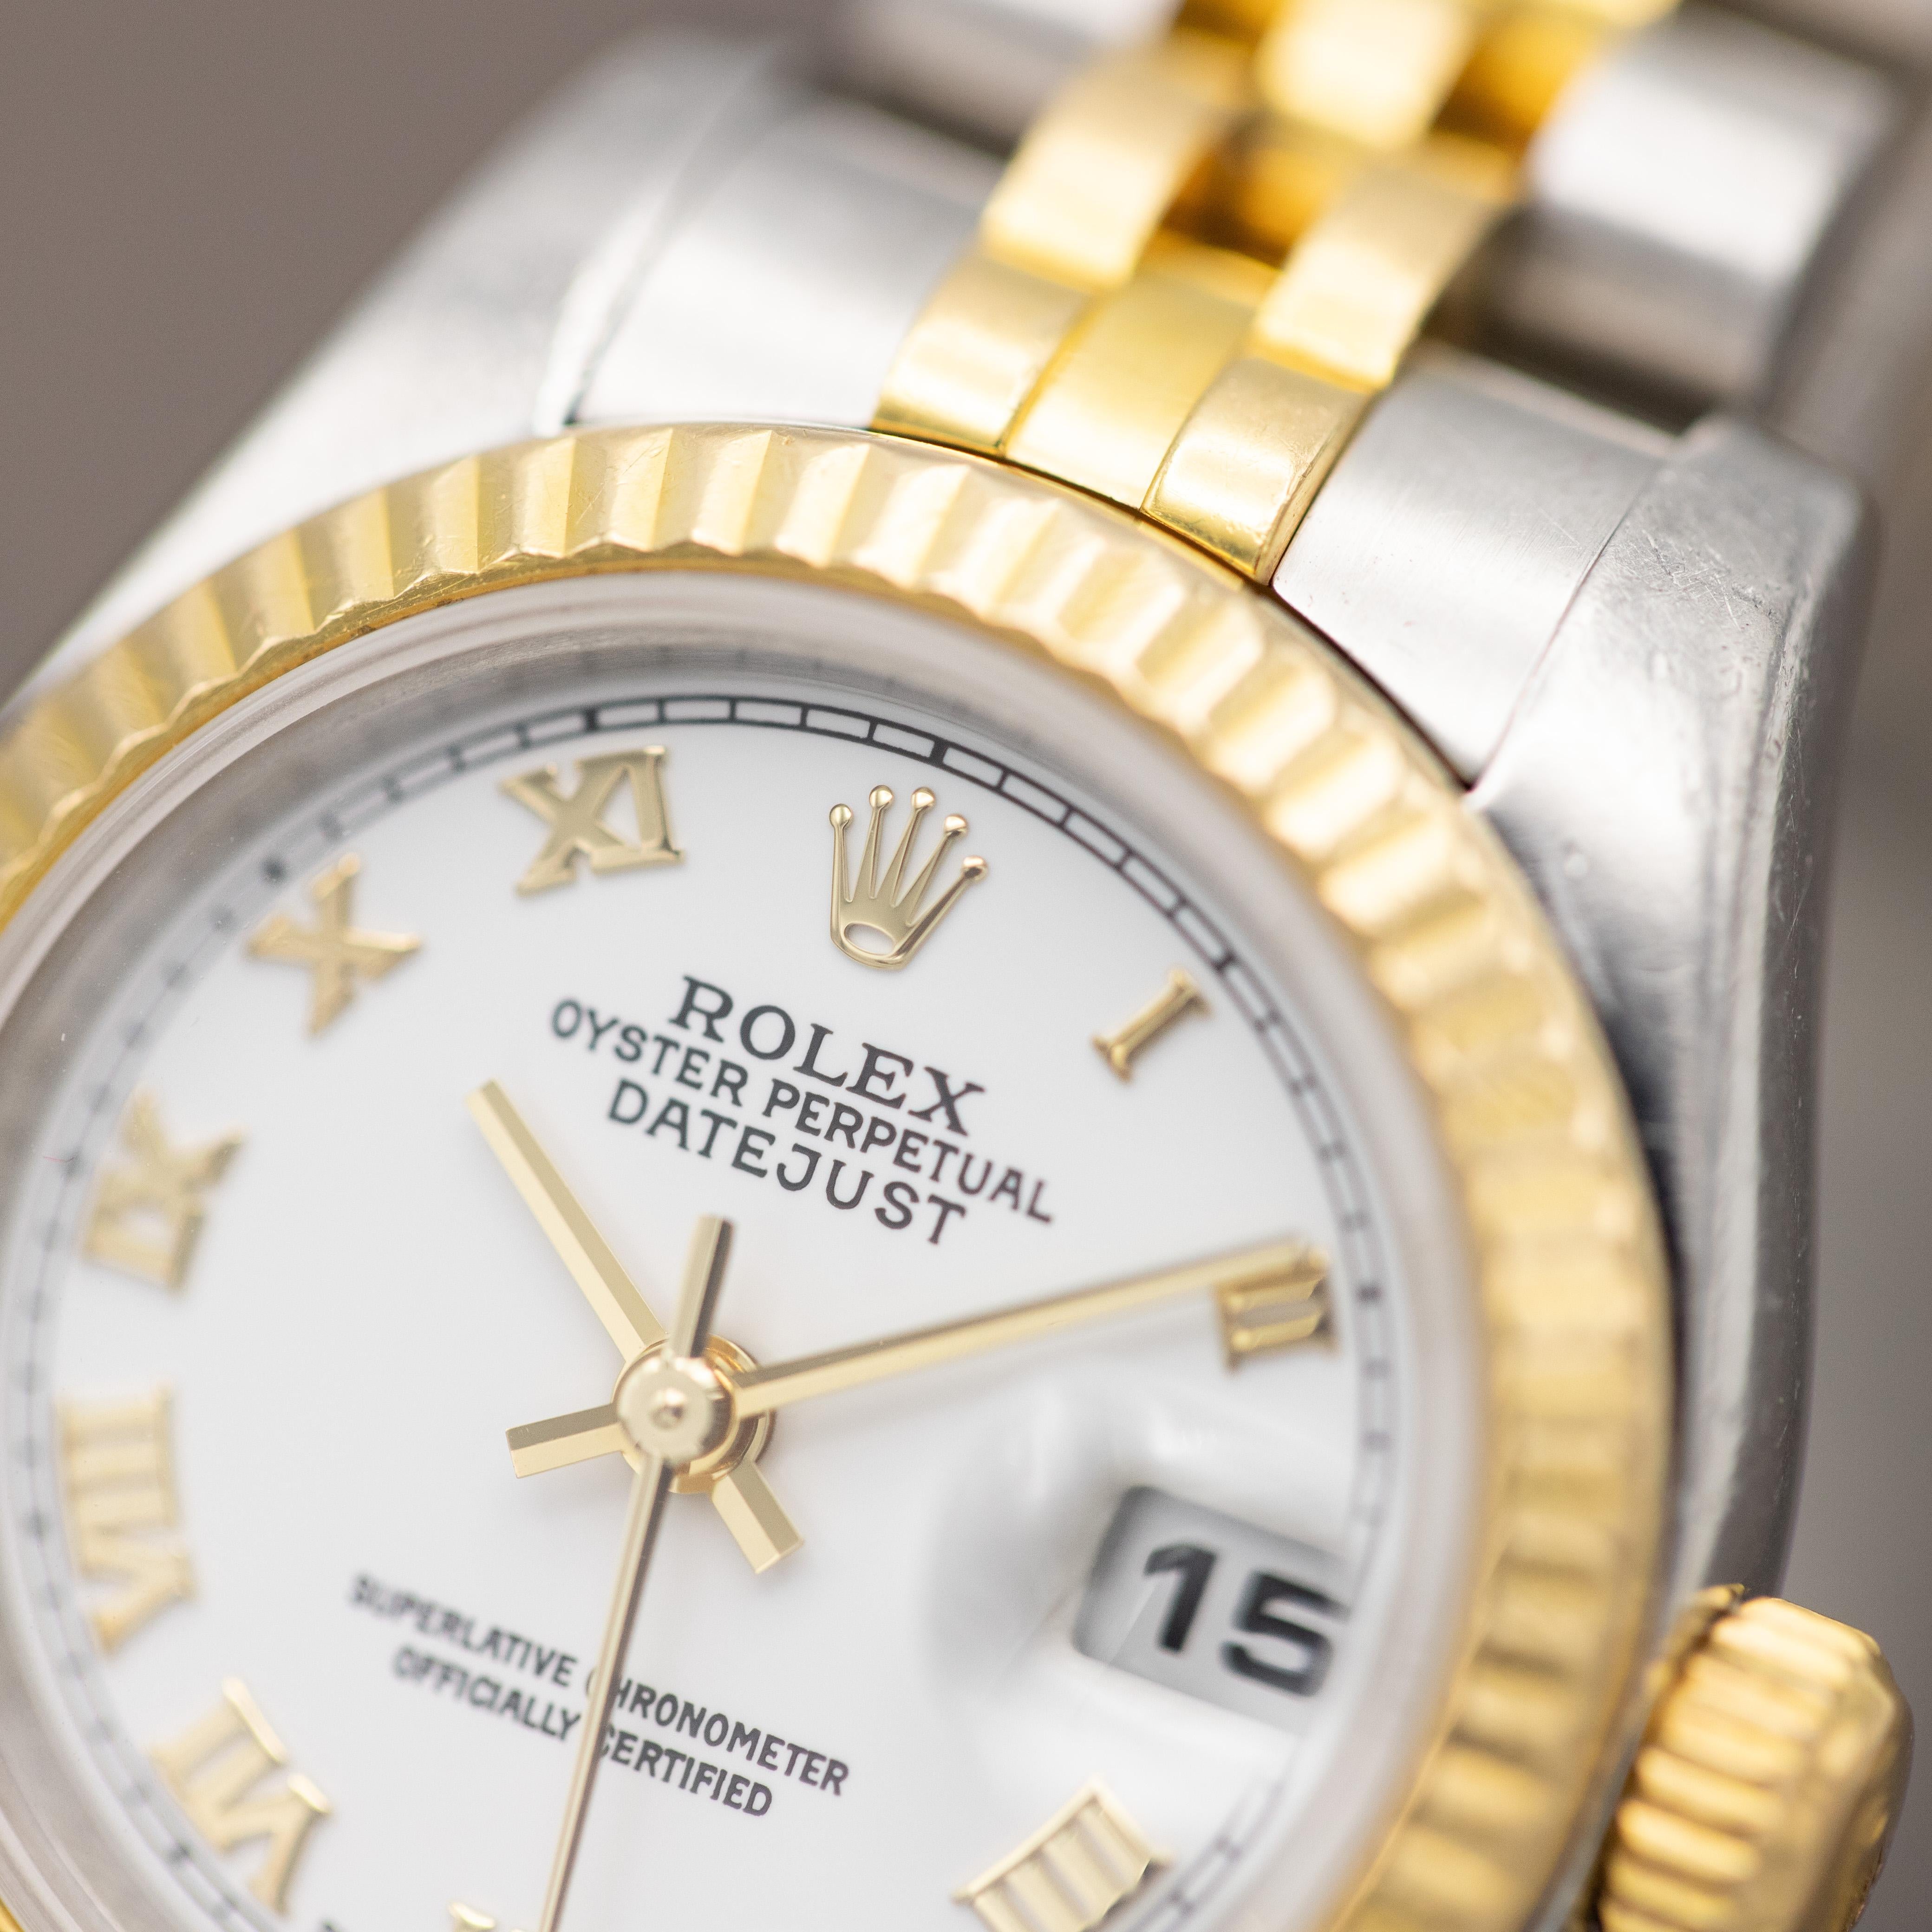 Modern Rolex Oyster Perpetual Lady Datejust Automatic - Vintage Ladies' Watch - Jubilee For Sale